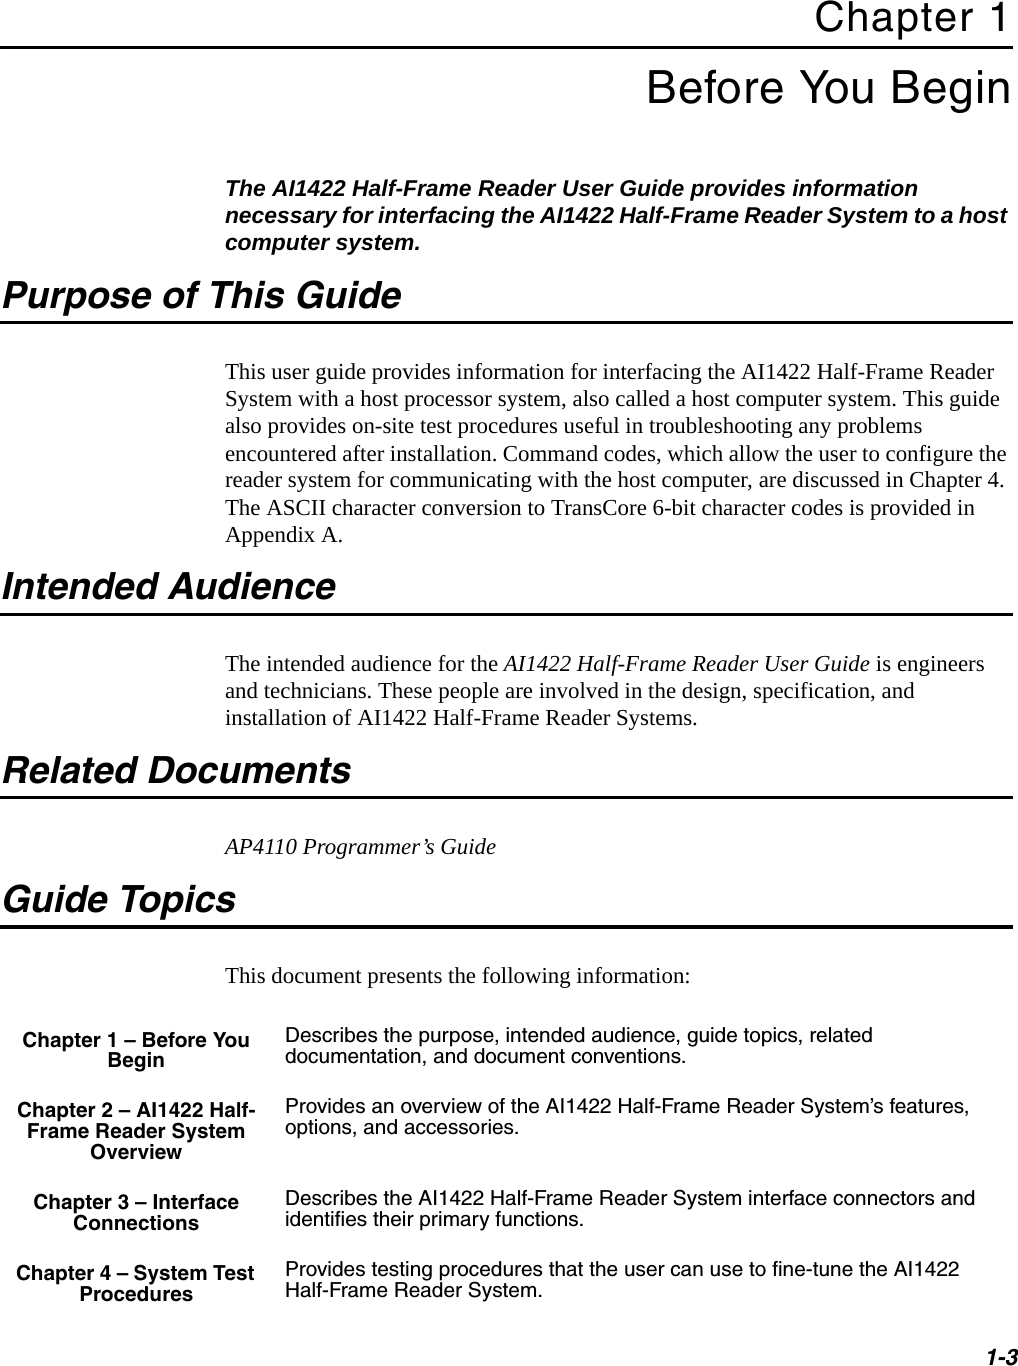 1-3Chapter 1Before You BeginThe AI1422 Half-Frame Reader User Guide provides information necessary for interfacing the AI1422 Half-Frame Reader System to a host computer system.Purpose of This GuideThis user guide provides information for interfacing the AI1422 Half-Frame Reader System with a host processor system, also called a host computer system. This guide also provides on-site test procedures useful in troubleshooting any problems encountered after installation. Command codes, which allow the user to configure the reader system for communicating with the host computer, are discussed in Chapter 4. The ASCII character conversion to TransCore 6-bit character codes is provided in Appendix A.Intended AudienceThe intended audience for the AI1422 Half-Frame Reader User Guide is engineers and technicians. These people are involved in the design, specification, and installation of AI1422 Half-Frame Reader Systems.Related DocumentsAP4110 Programmer’s GuideGuide TopicsThis document presents the following information:Chapter 1 – Before You BeginDescribes the purpose, intended audience, guide topics, related documentation, and document conventions.Chapter 2 – AI1422 Half-Frame Reader System OverviewProvides an overview of the AI1422 Half-Frame Reader System’s features, options, and accessories.Chapter 3 – Interface ConnectionsDescribes the AI1422 Half-Frame Reader System interface connectors and identifies their primary functions.Chapter 4 – System Test ProceduresProvides testing procedures that the user can use to fine-tune the AI1422 Half-Frame Reader System.